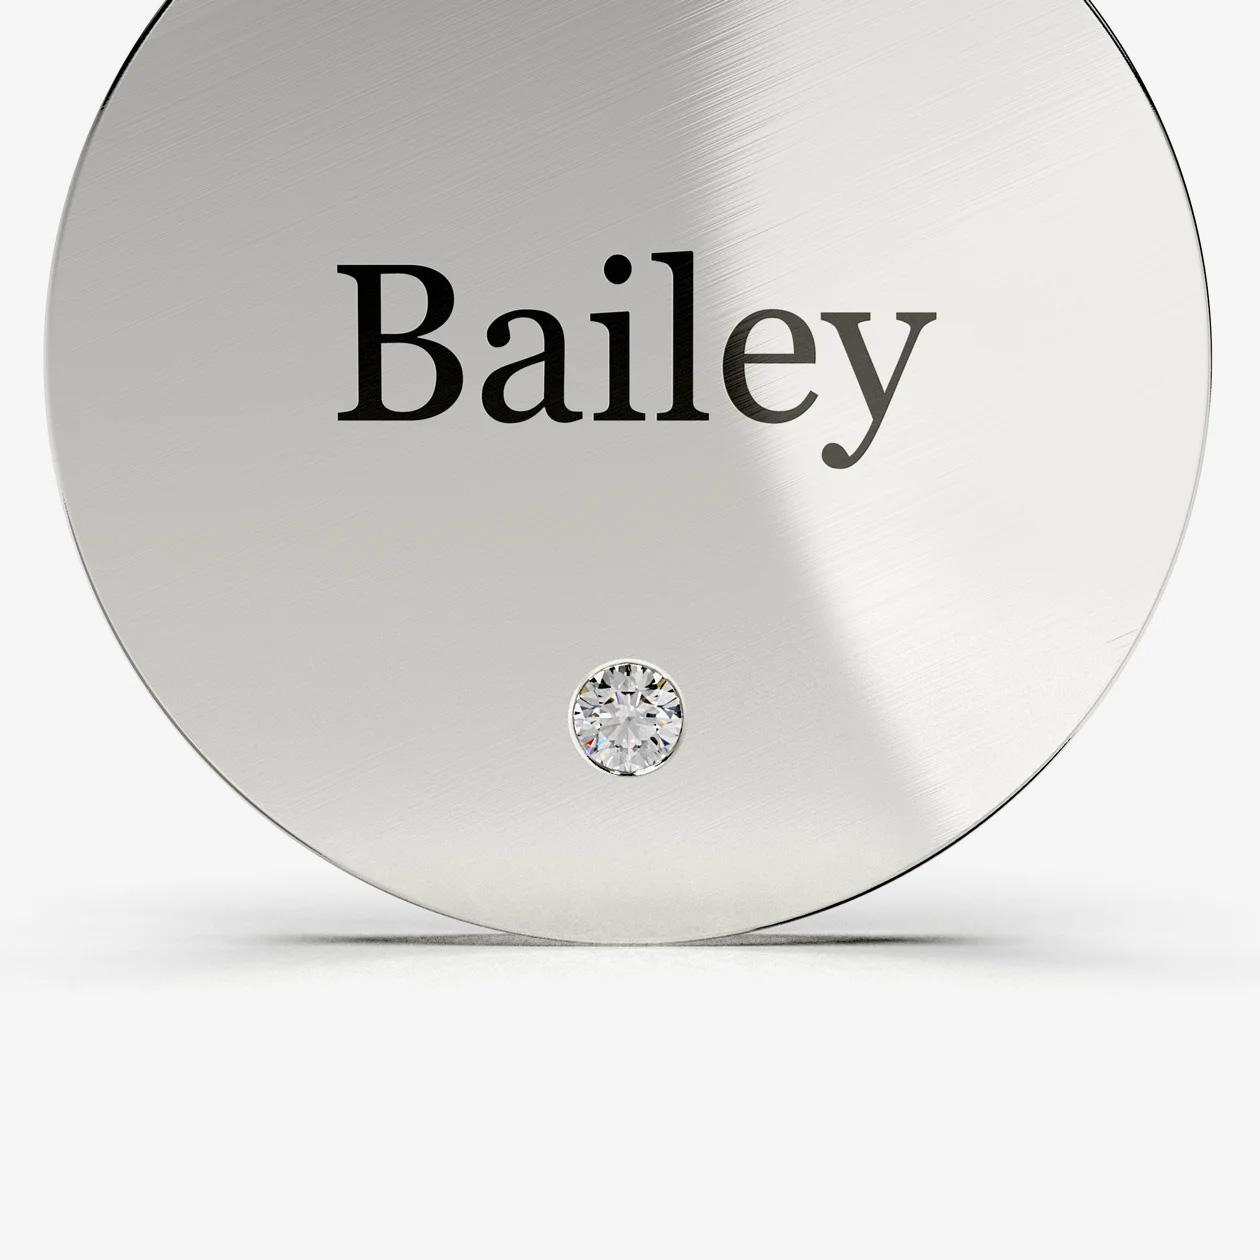 STAINLESS STEEL CLASSIC ROUND PET NAME TAG FEATURED